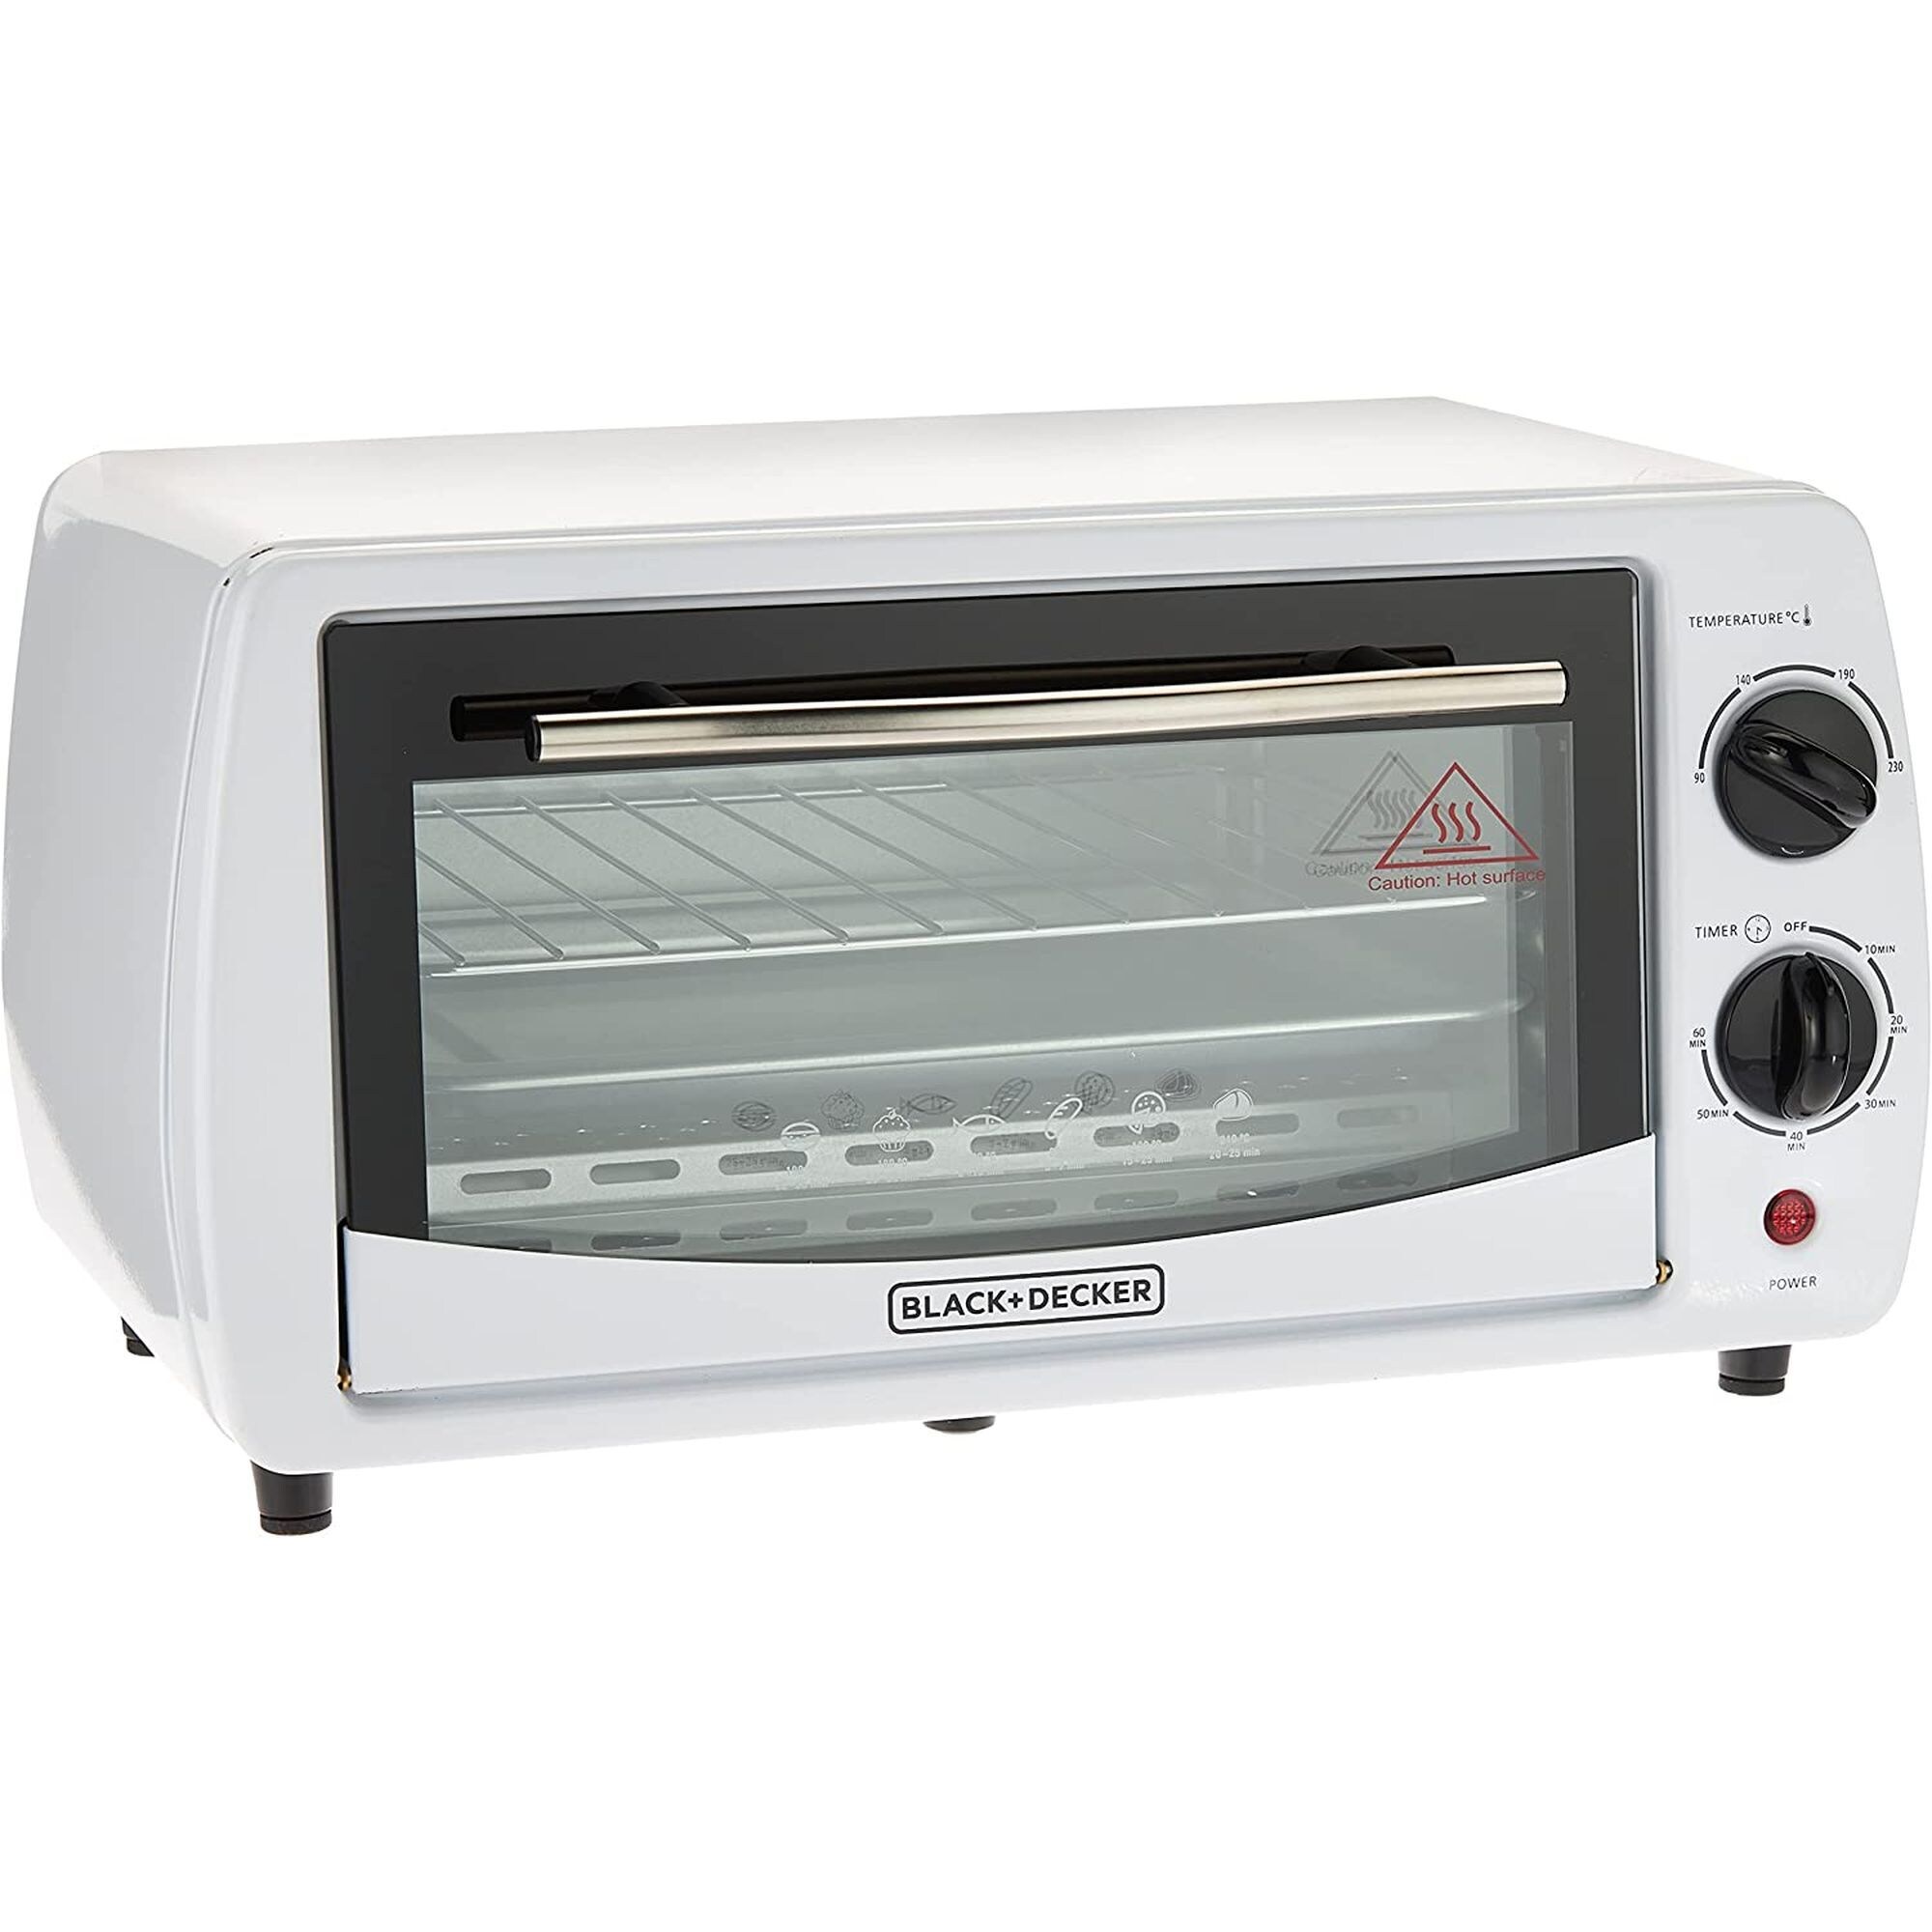 Black & Decker Toaster Oven With Double Glass, 800W, 9L